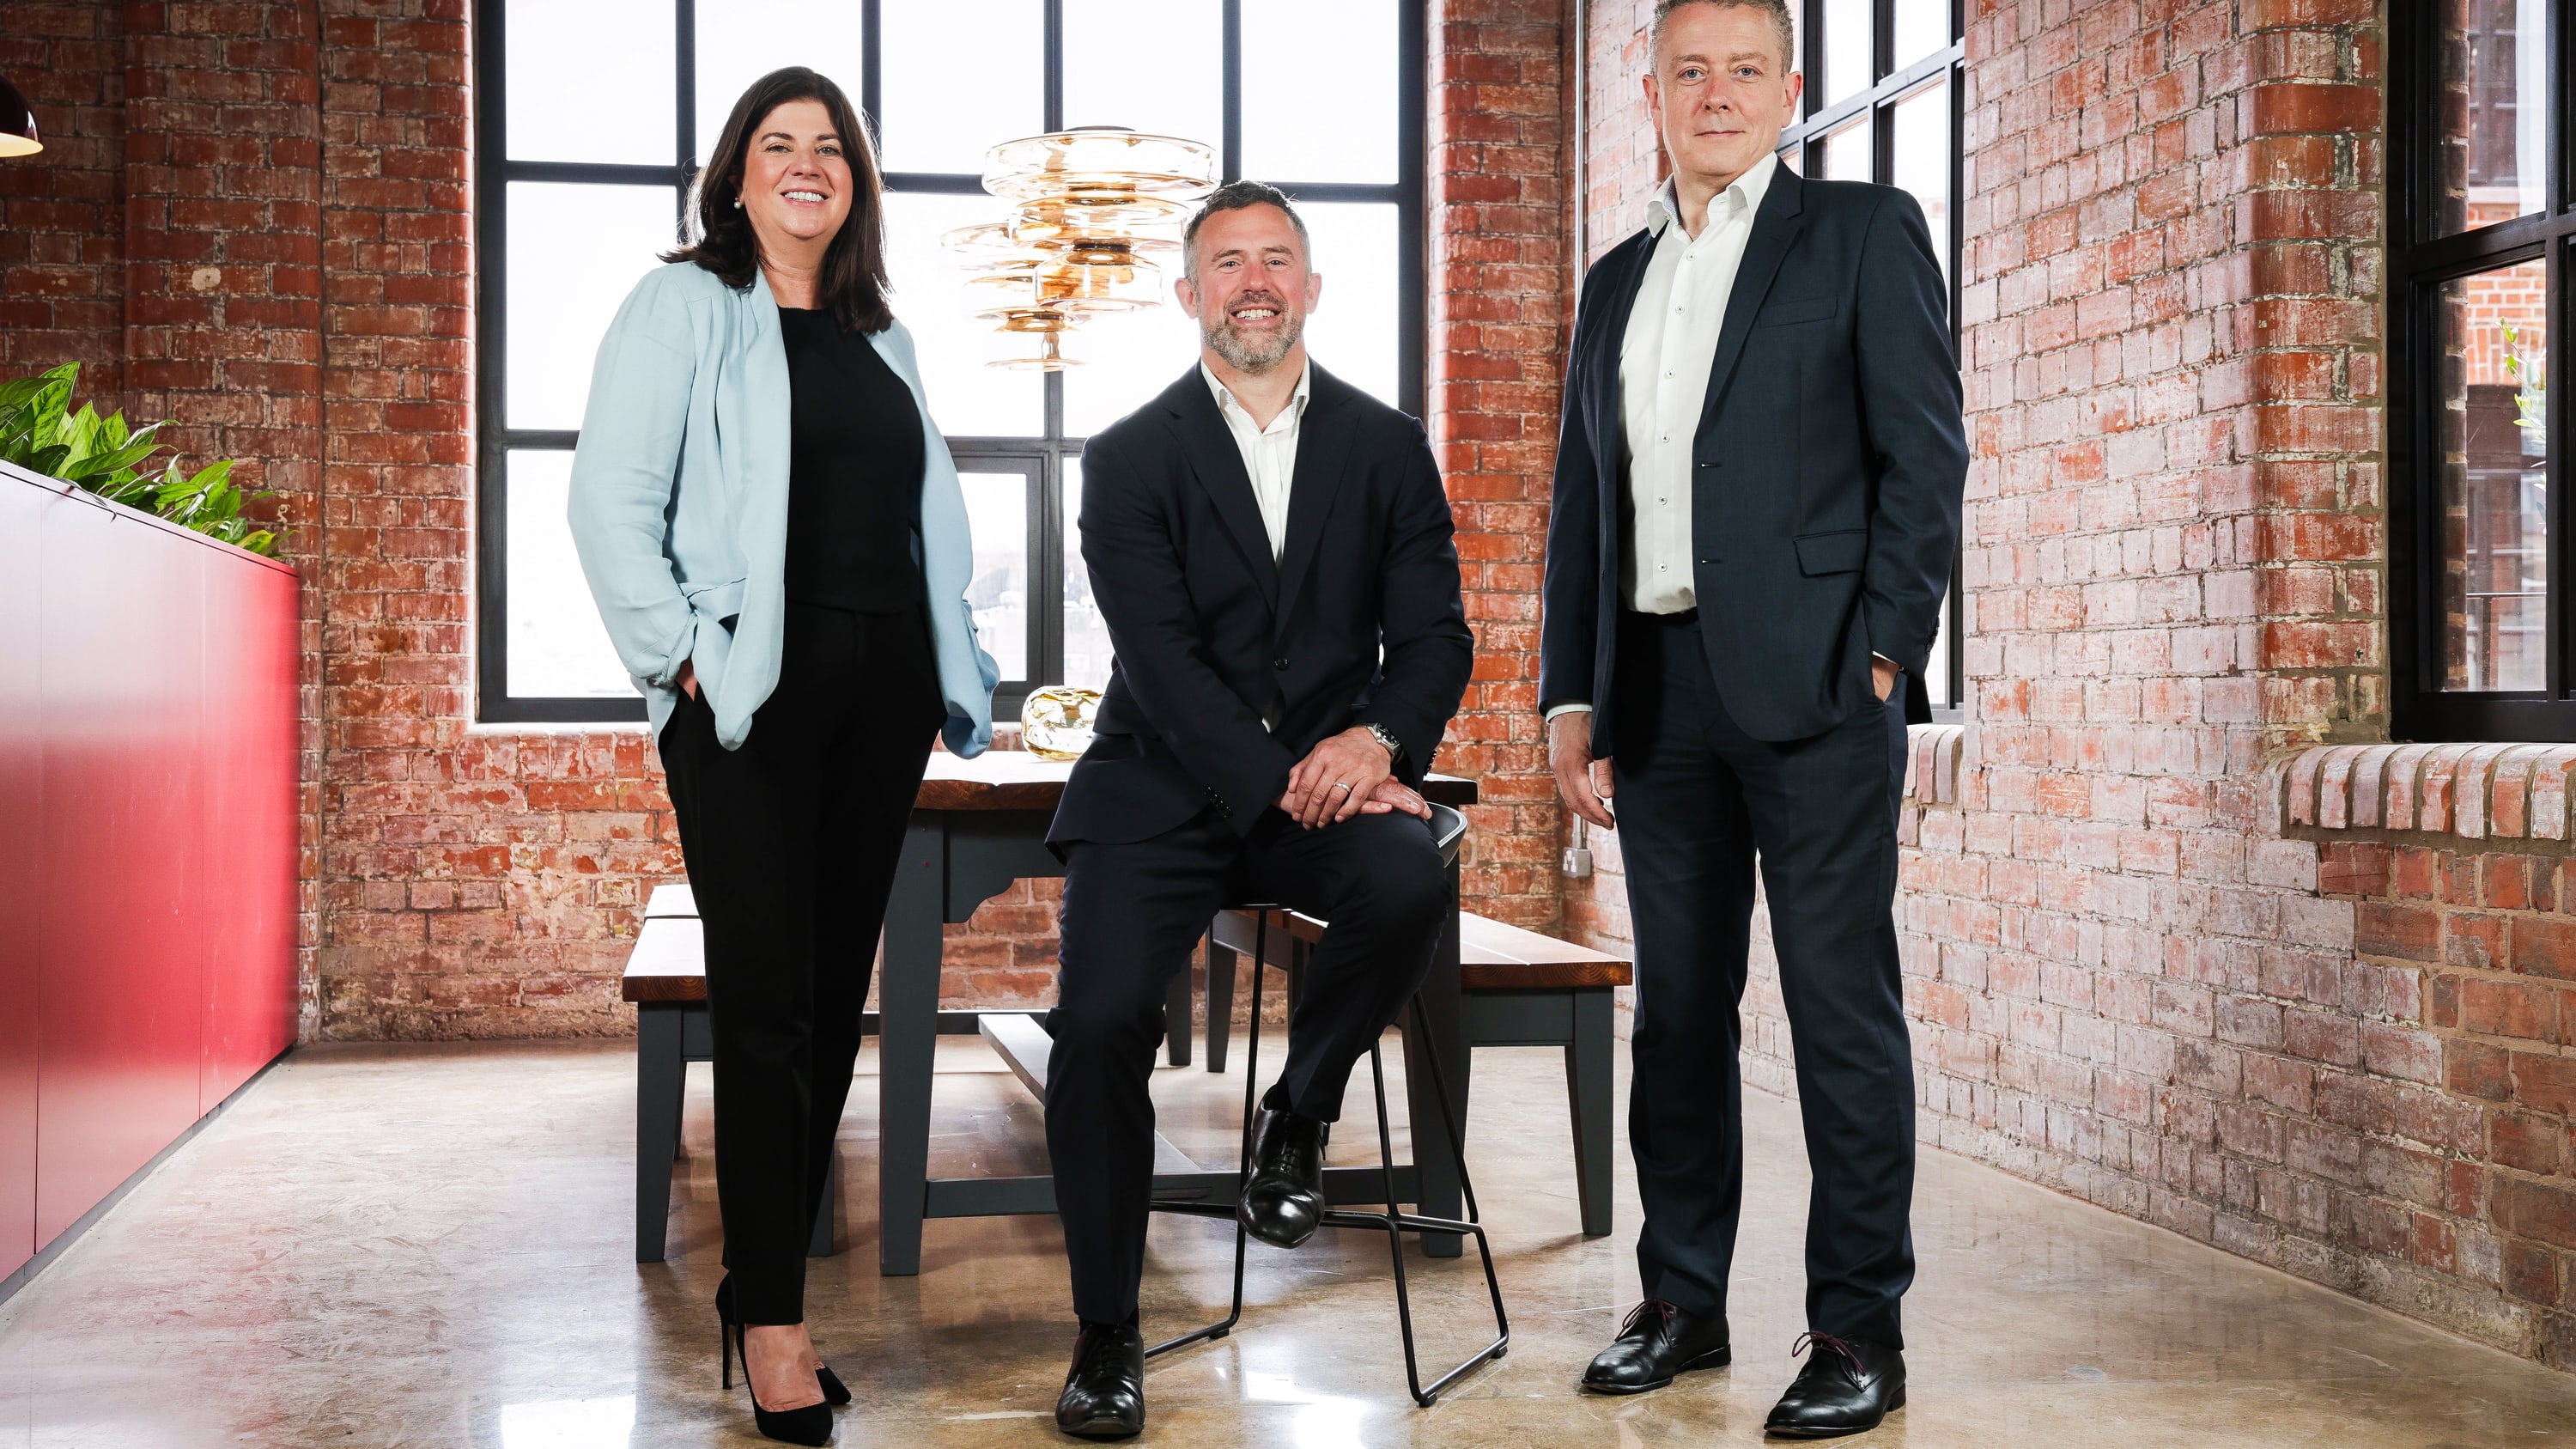 Law firm Millar McCall Wylie has relocated to the striking Victorian-era Printworks building in Belfast’s Queen Street, creating what it calls ‘a solid foundation’ for its future